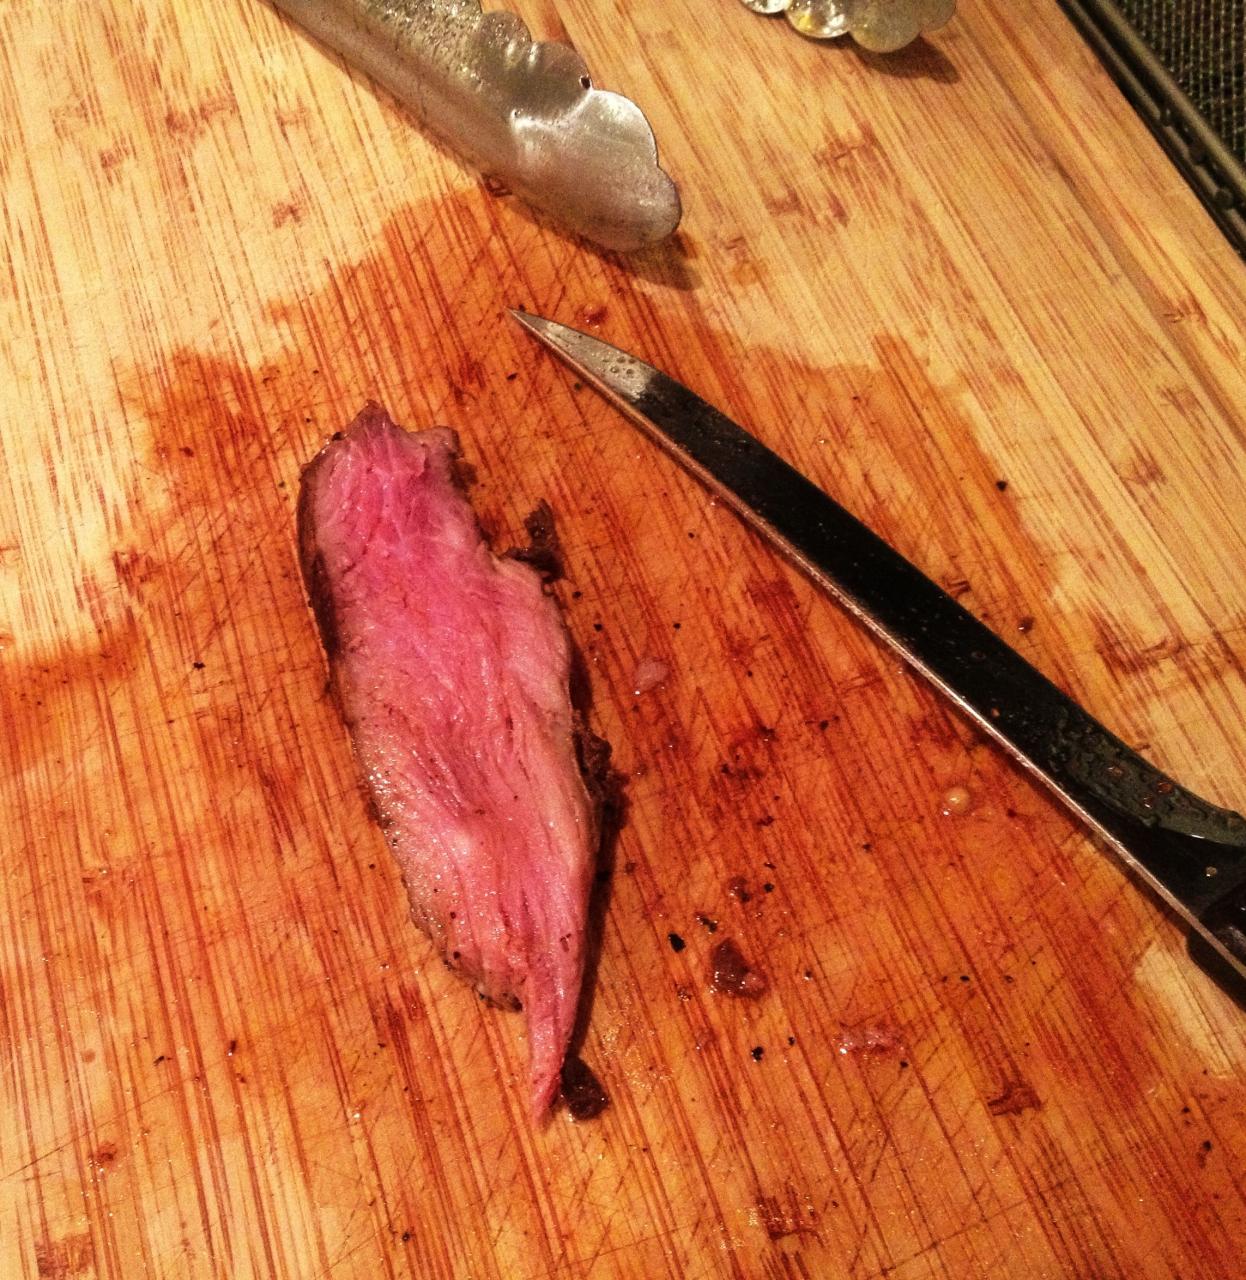 How To Cook A Marinated Tri Tip